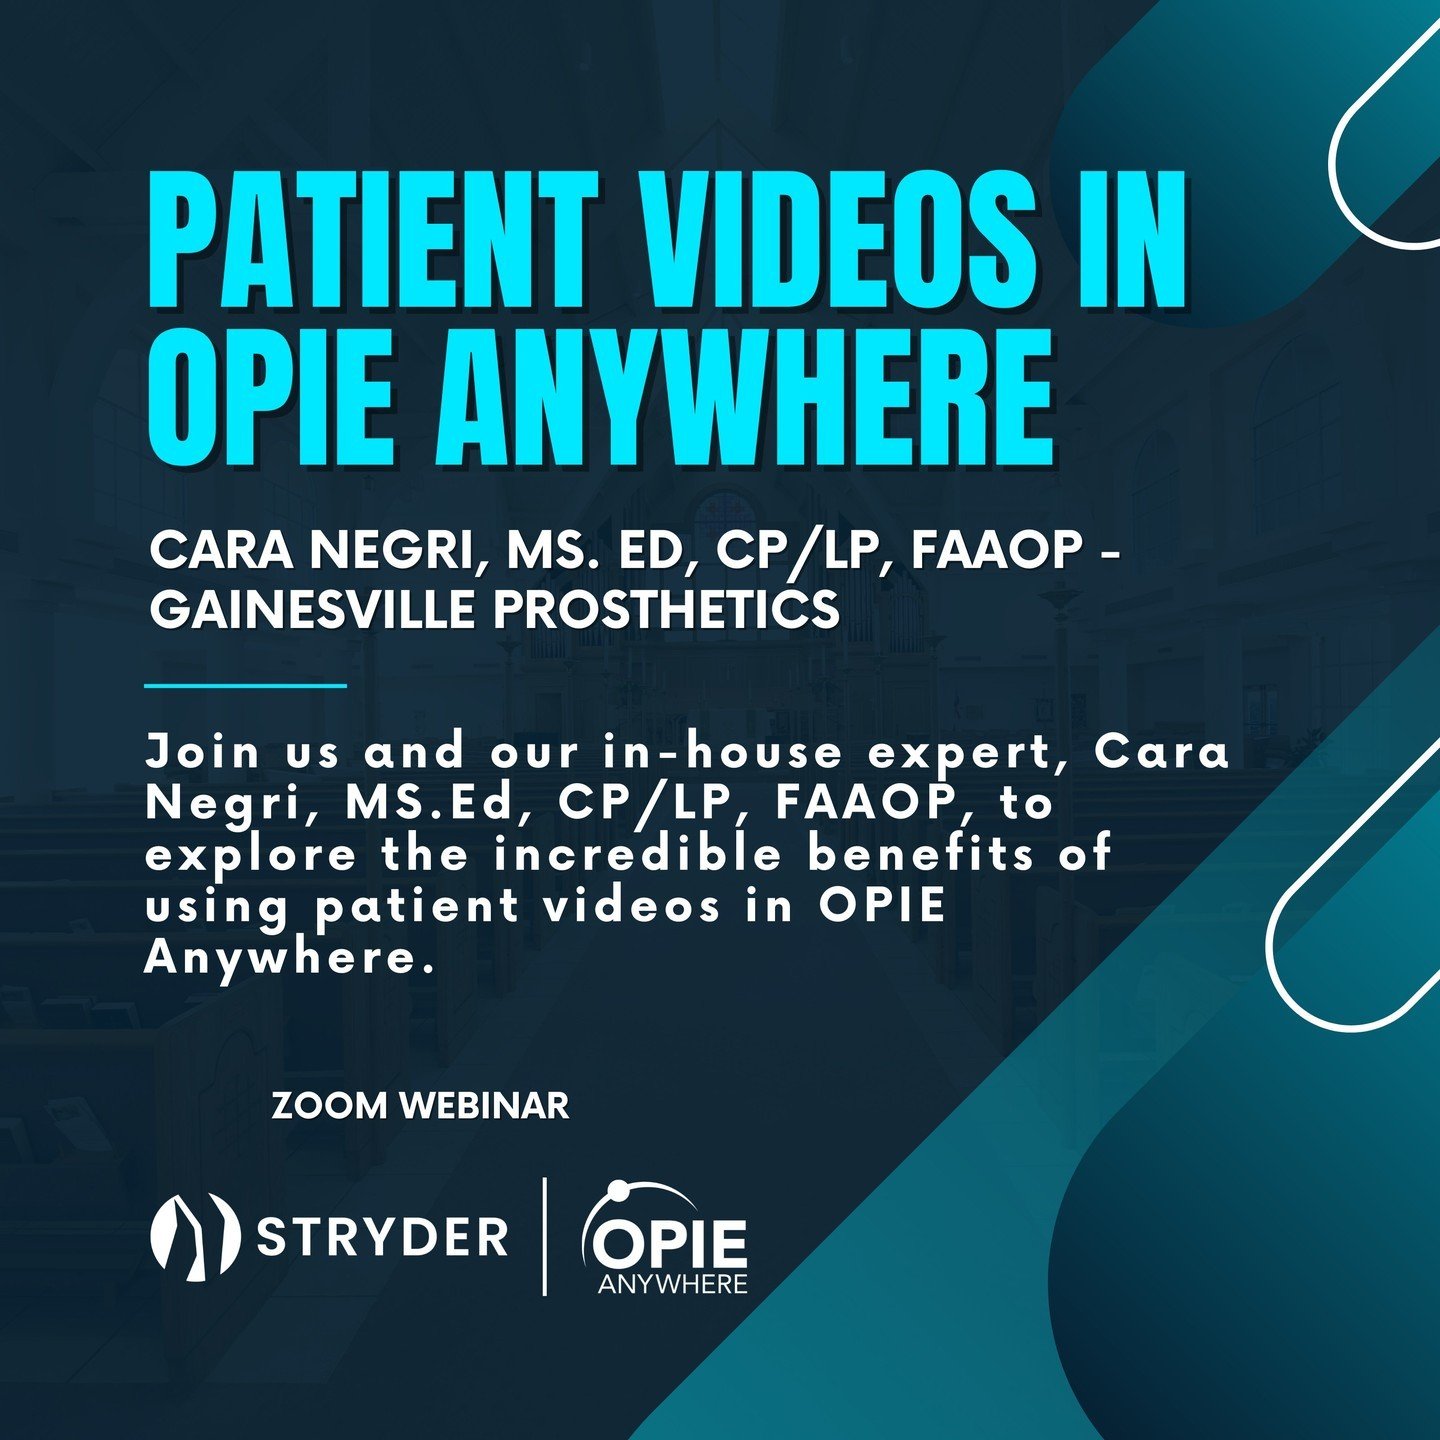 🎥 Unlock the Power of Patient Videos in OPIE Anywhere! 🌟

Join us and our in-house expert, Cara Negri, MS.Ed, CP/LP, FAAOP, this afternoon, to explore the incredible benefits of using patient videos in OPIE Anywhere.

- Say goodbye to toggling betw